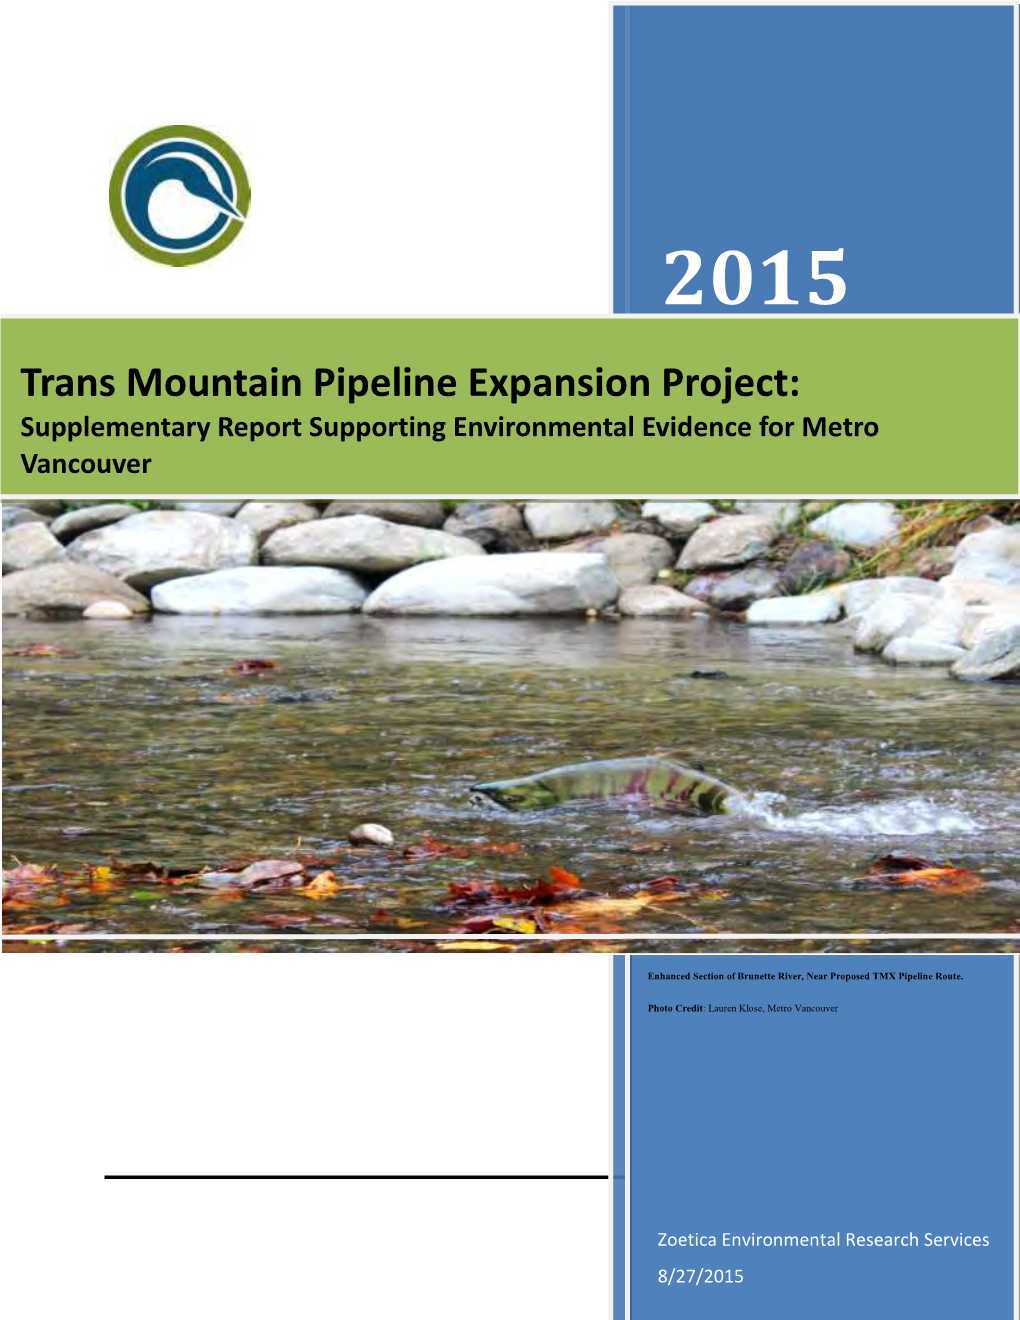 Trans Mountain Pipeline Expansion Project: Supplementary Report Supporting Environmental Evidence for Metro Vancouver